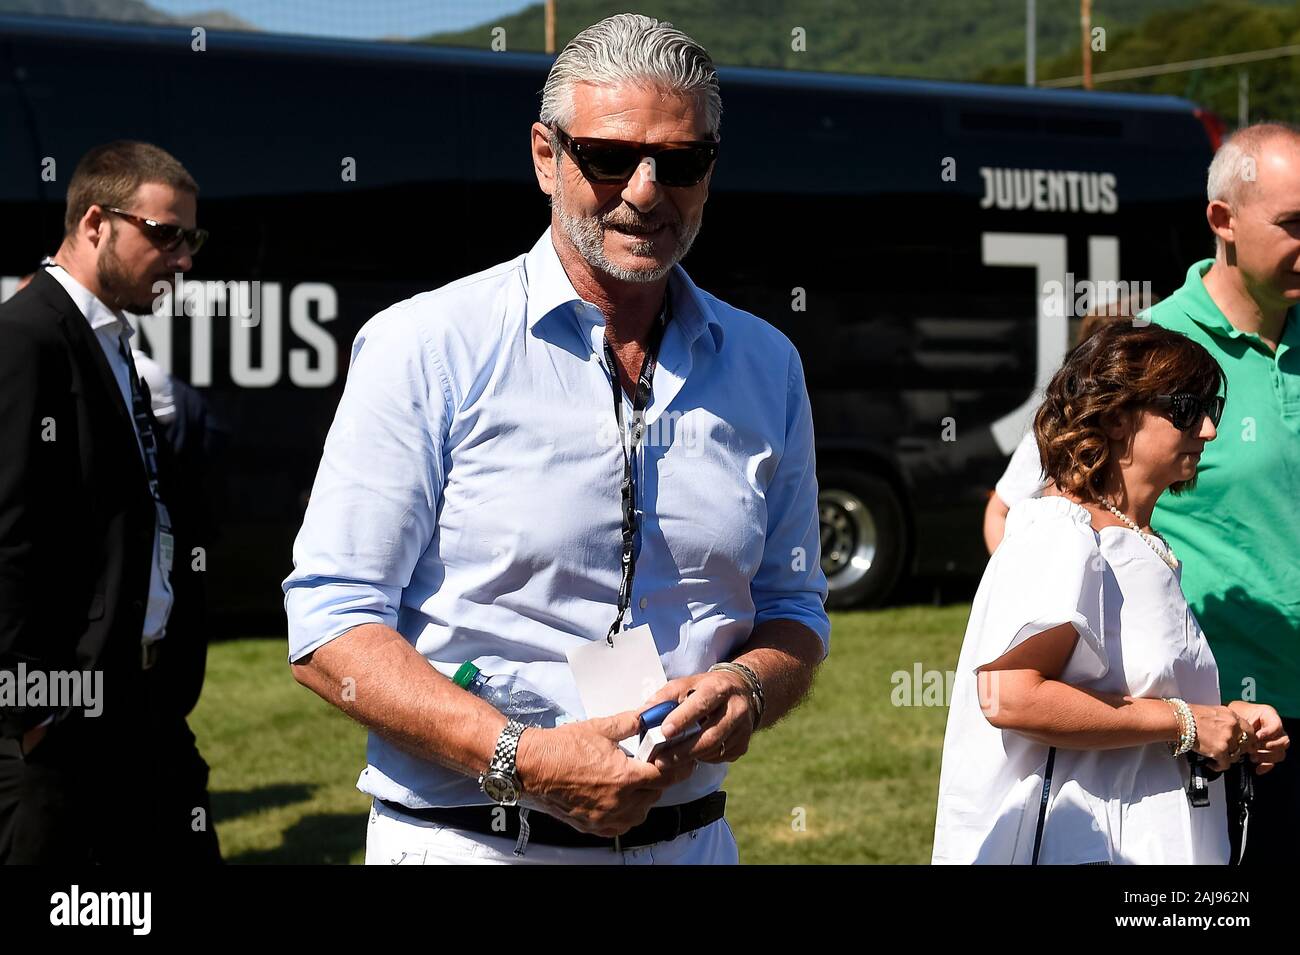 F1 2020 My Driver Career - Sivu 3 Villar-perosa-turin-italy-14-august-2019-maurizio-arrivabene-member-of-the-board-of-directors-of-juventus-fc-arrives-before-the-pre-season-friendly-match-between-juventus-fc-and-juventus-u19-juventus-fc-won-3-1-over-juventus-u19-credit-nicol-campoalamy-live-news-2AJ962N